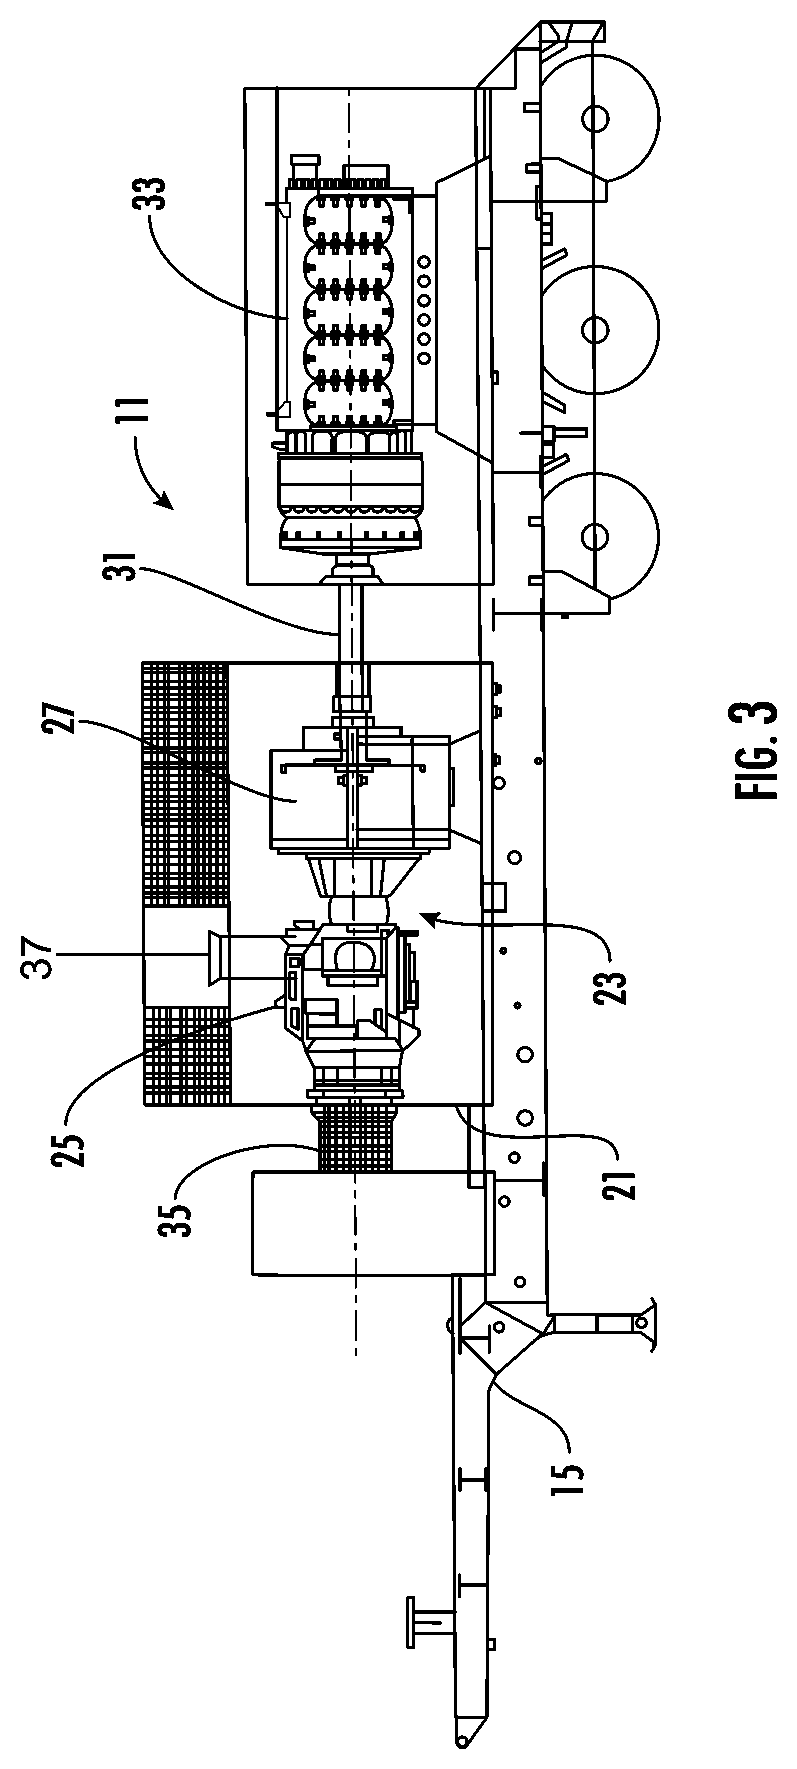 Methods and systems for operating a fleet of pumps